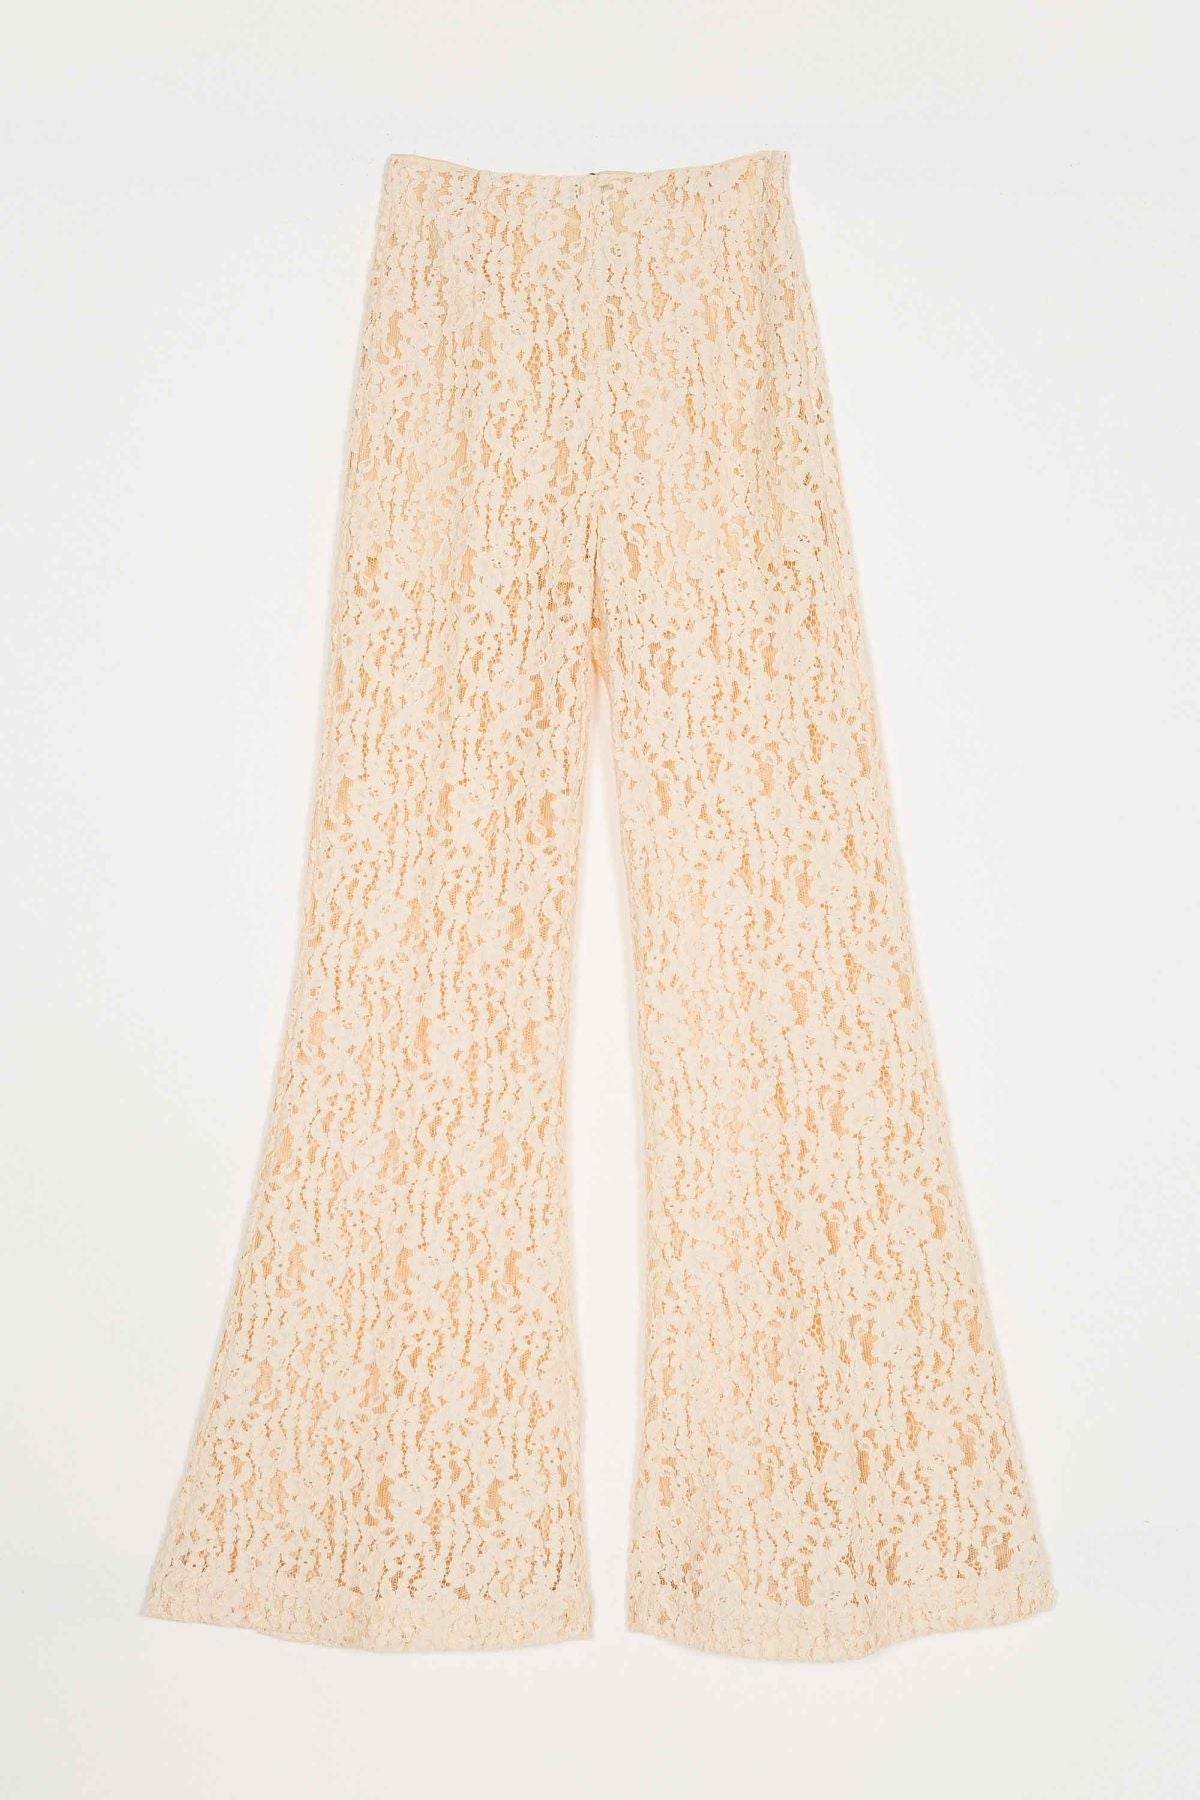 Twinset Lace Woven Trousers Pants